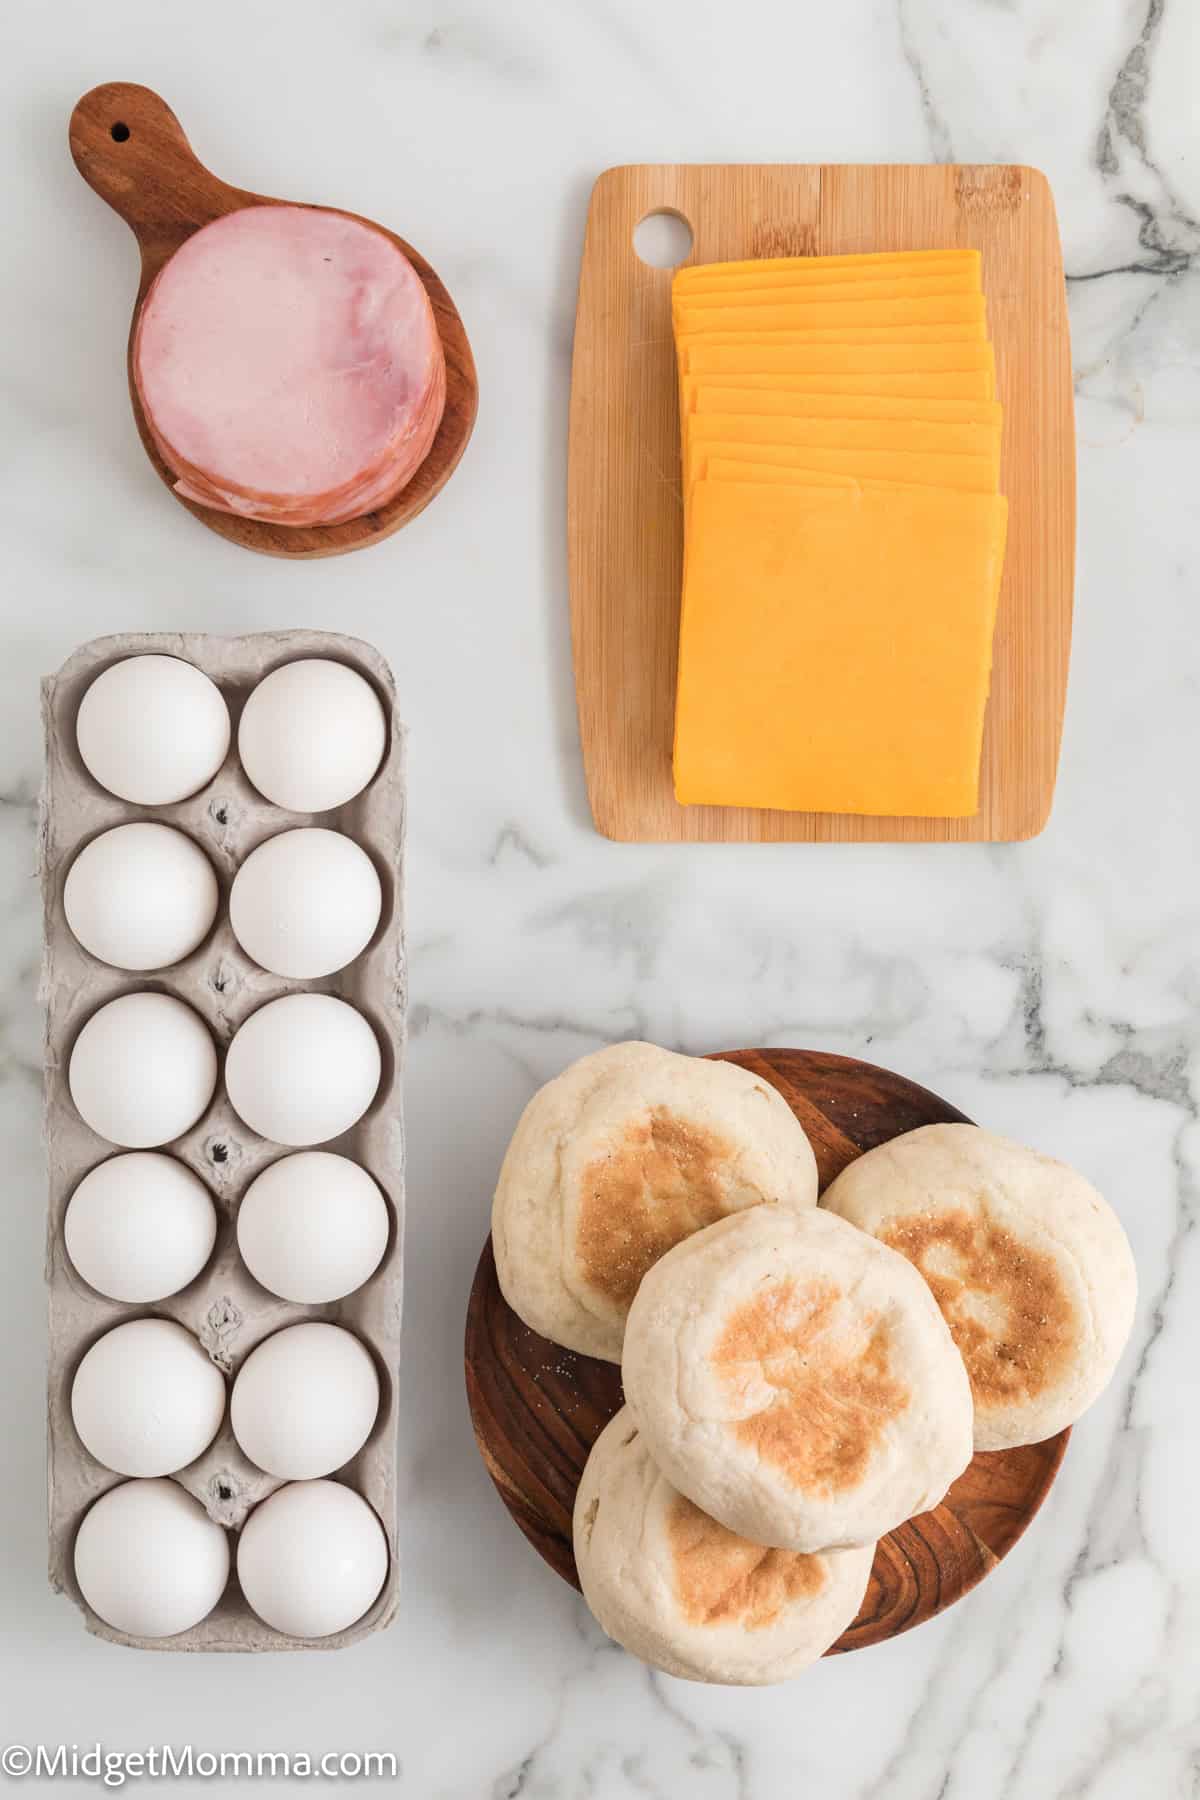 A marble surface with a pack of eggs, a stack of English muffins, a wooden board of cheese slices, and a wooden dish holding a slice of canadian bacon to make egg mcmuffin recipe.